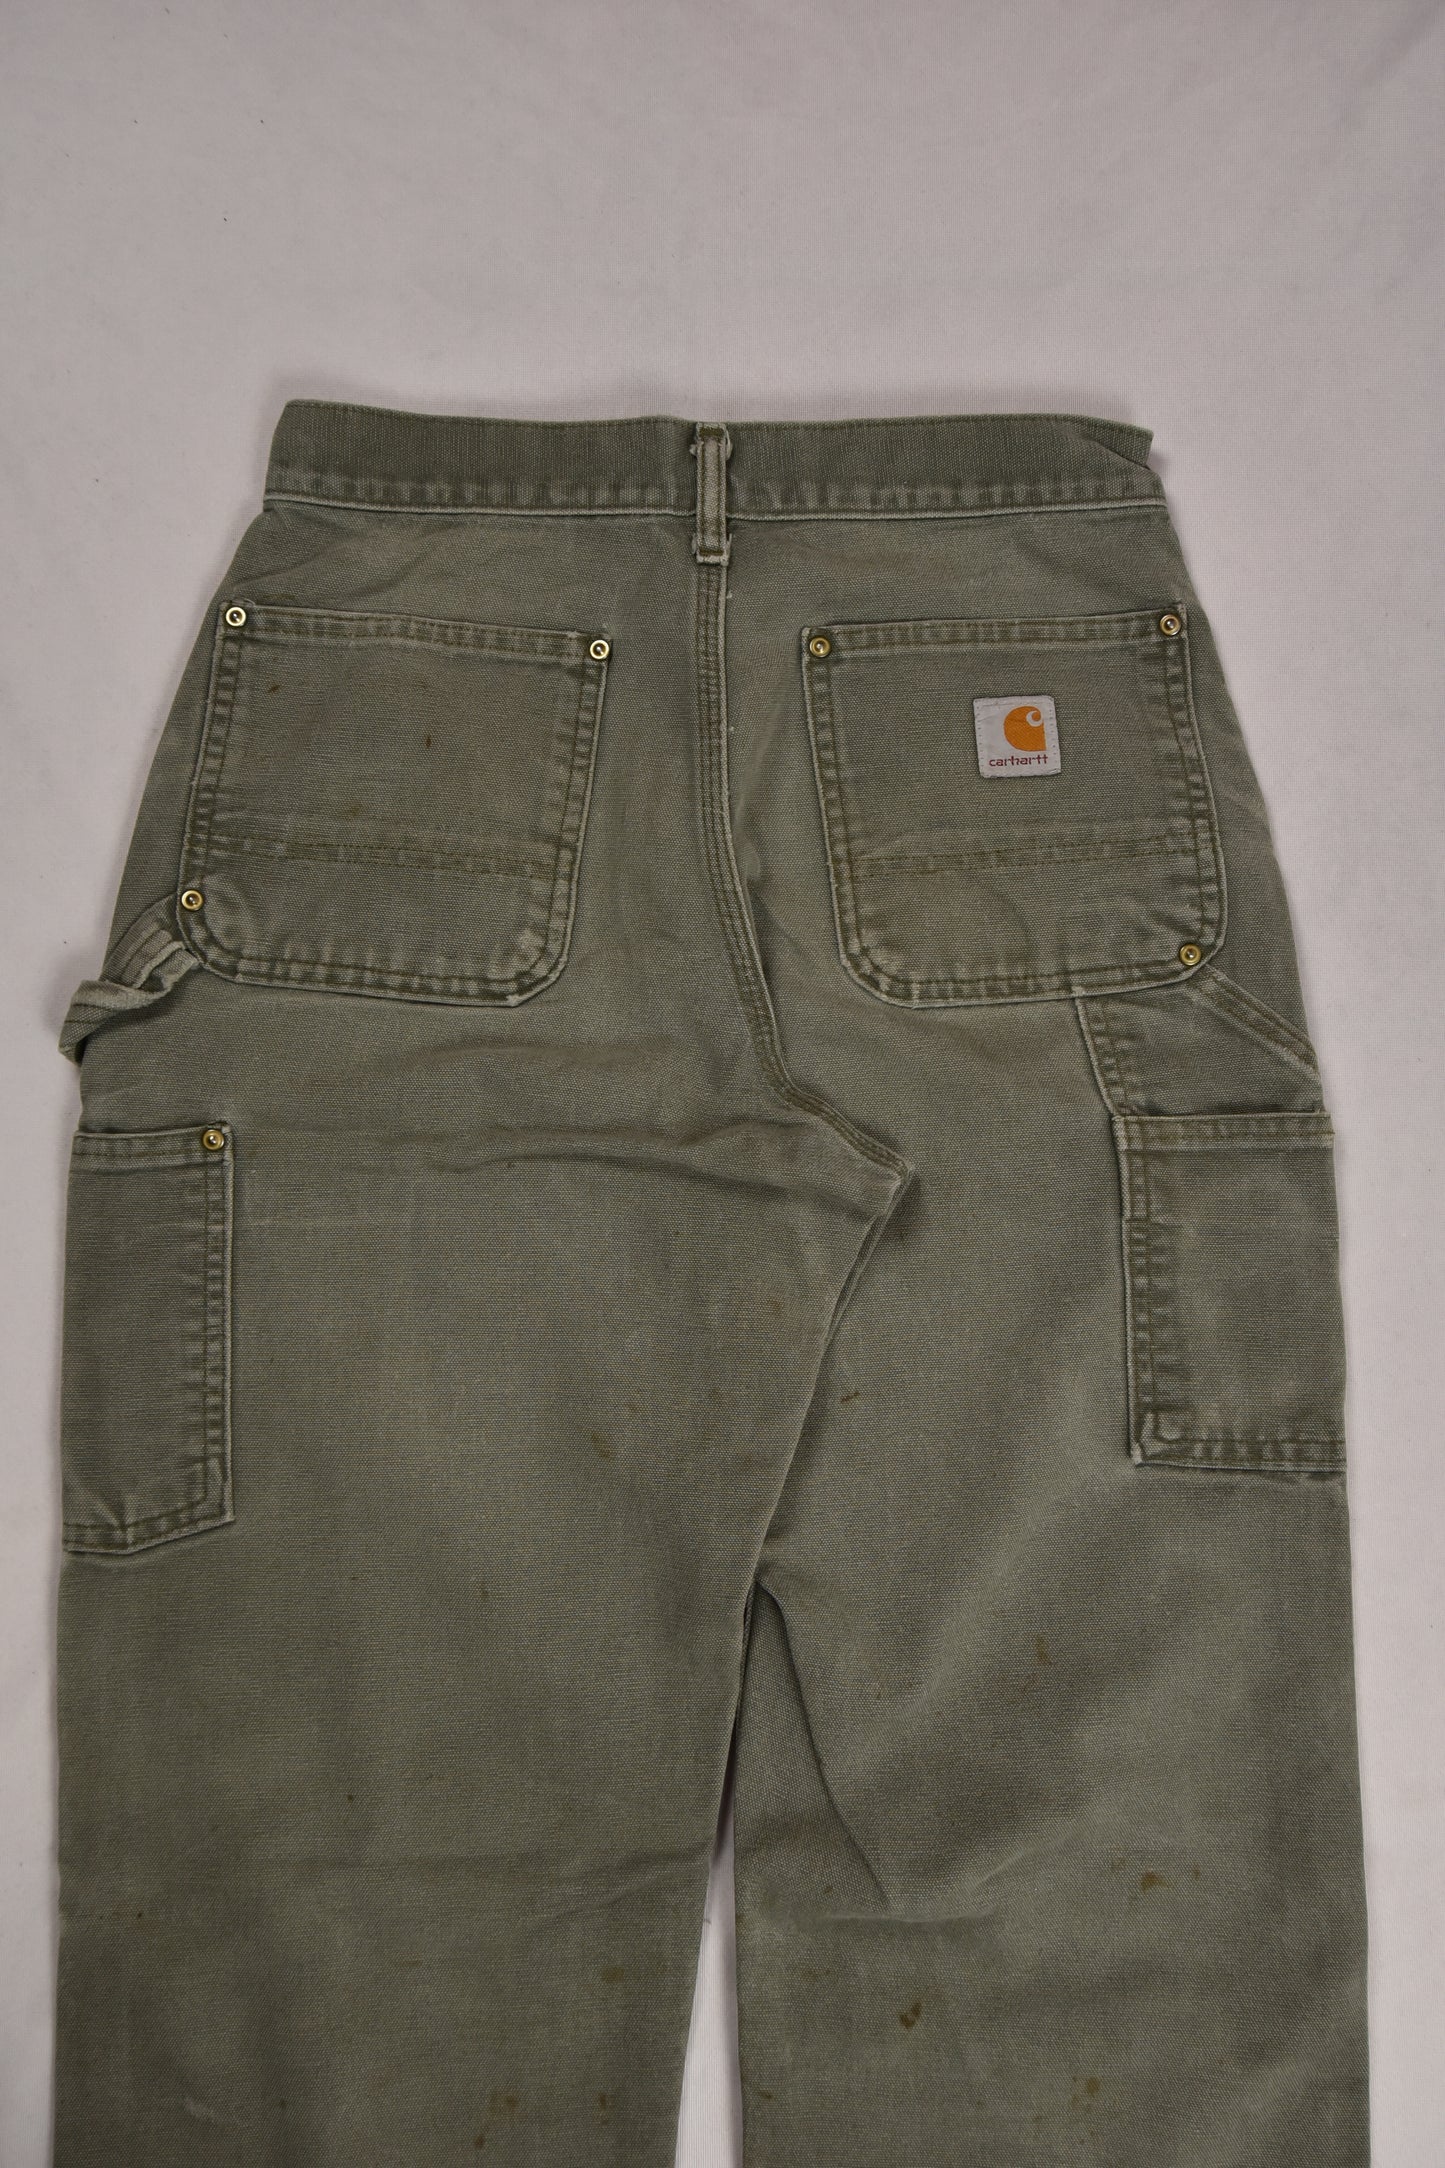 Carhartt Double Knee Workwear Made in USA Pants Vintage / 28x30